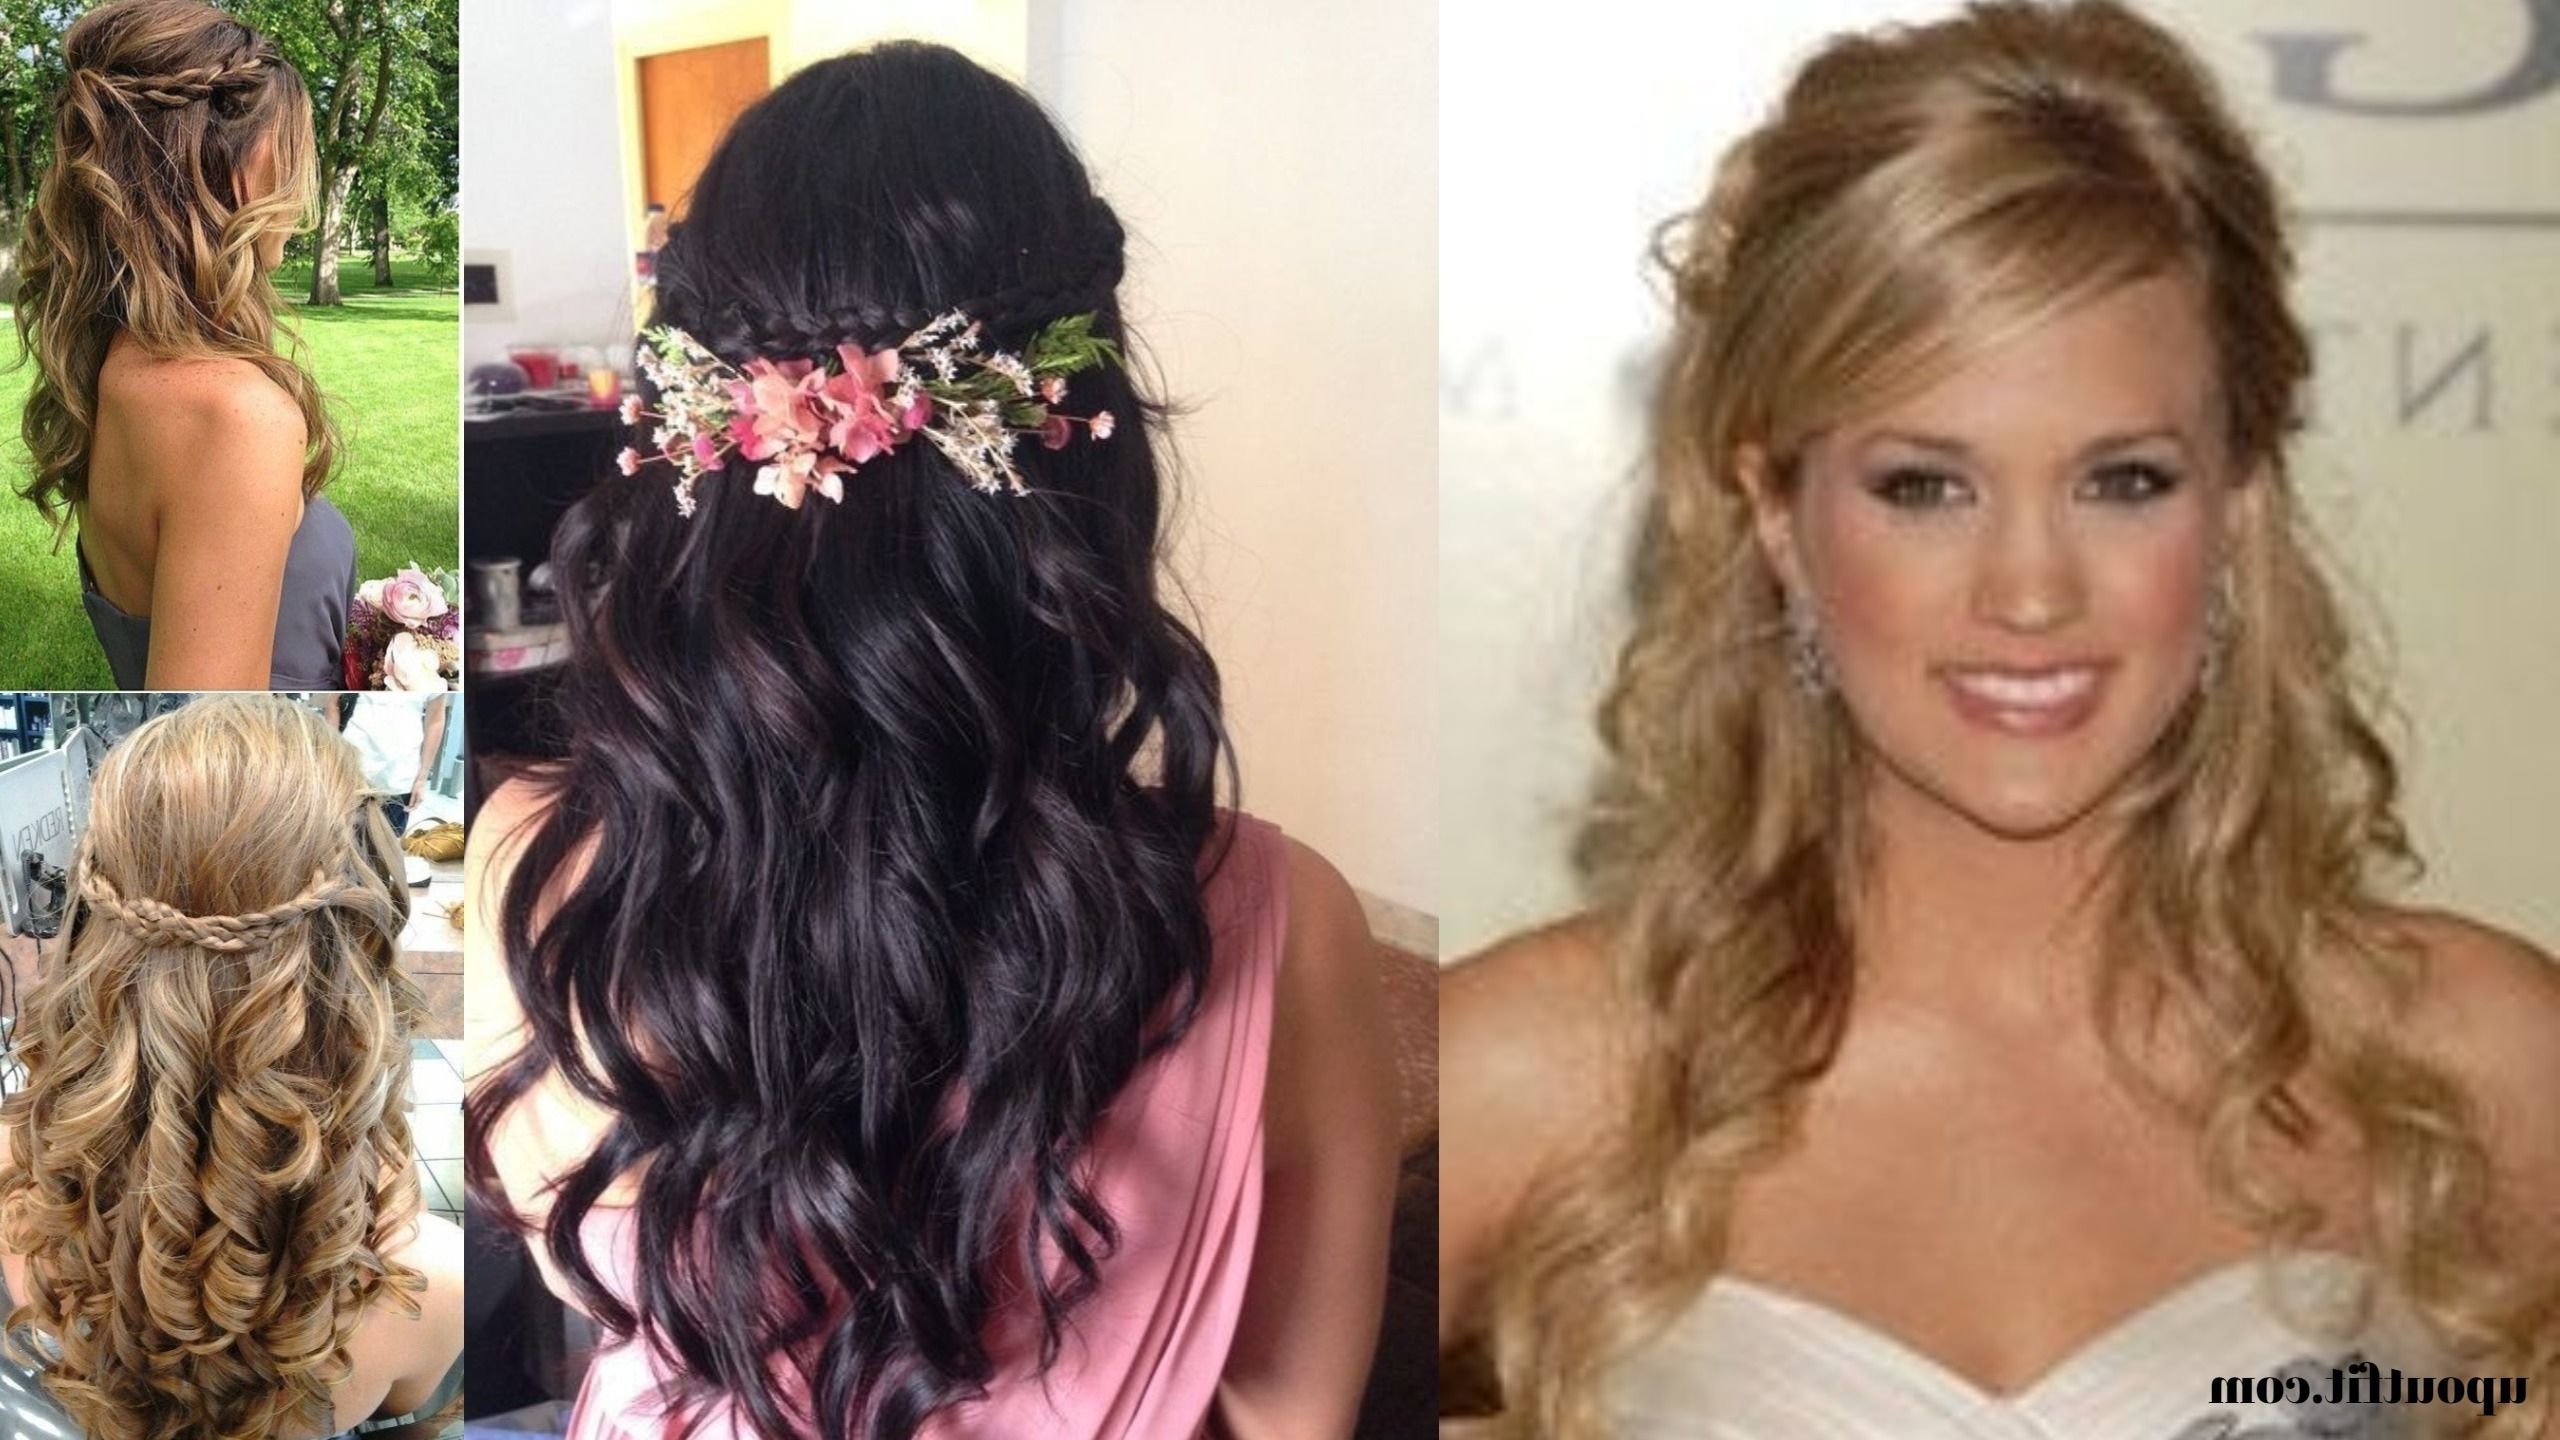 62 Stunning Prom Hairstyle Ideas For Curly Long Hair – Upoutfit Throughout Most Recent Curly Knot Sideways Prom Hairstyles (Gallery 19 of 20)